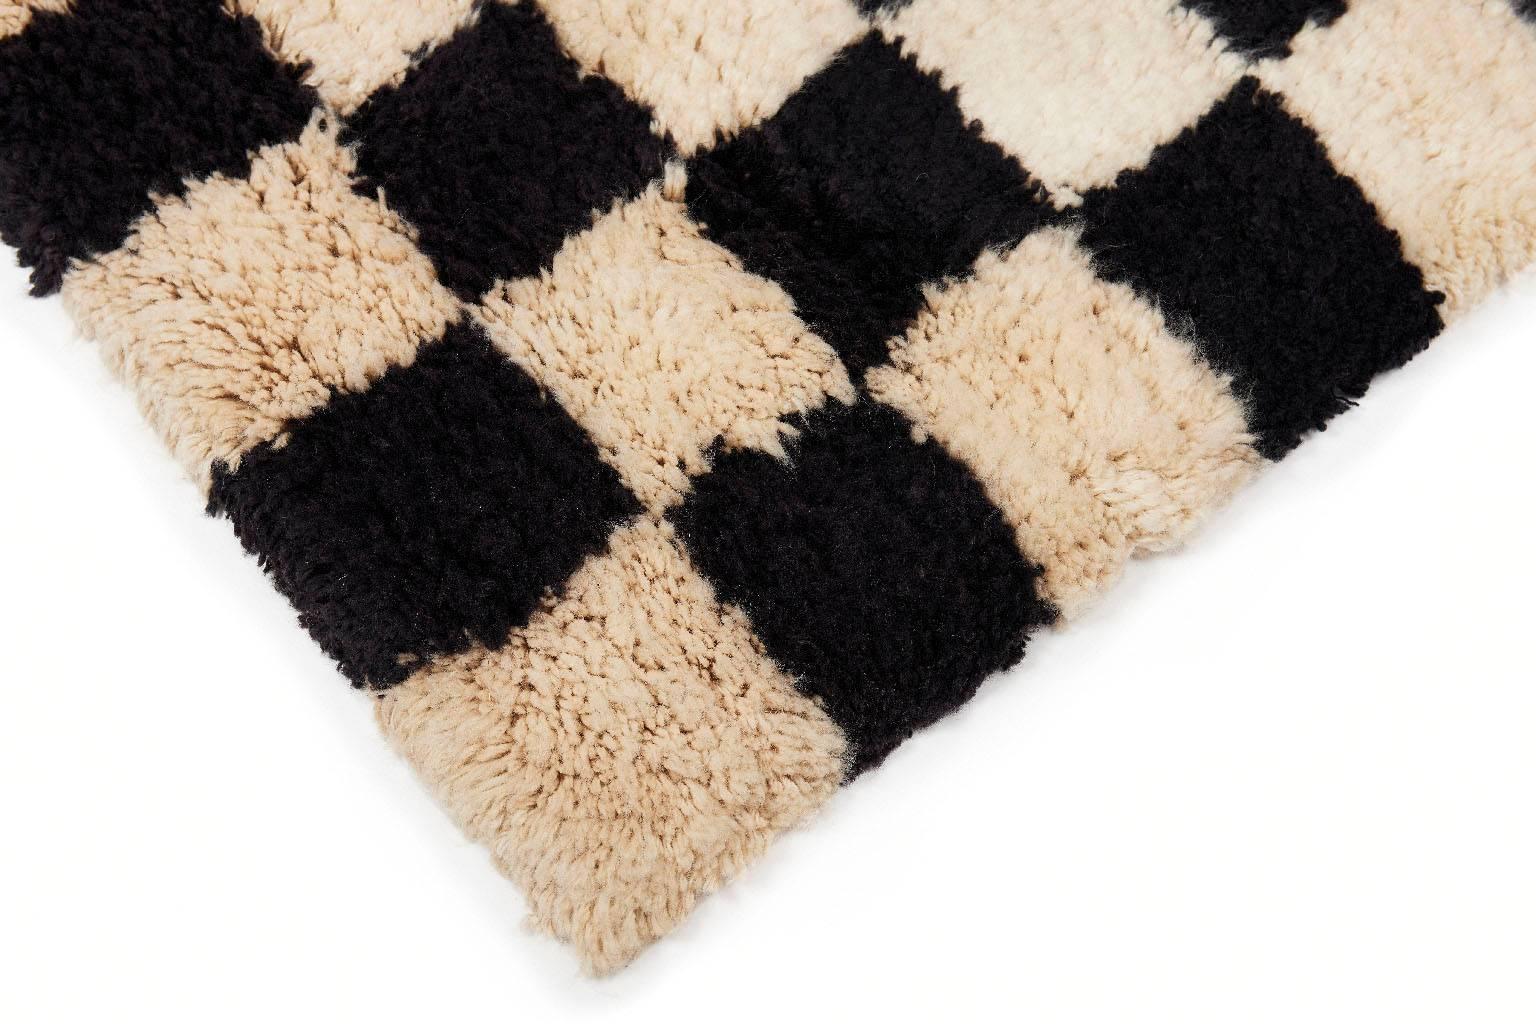 The ultimate rug for lounging, reading, or sleeping. The checkerboard black and white shag rug is hand-knotted with 100% high quality New Zealand wool. Super soft and plush with a Classic design. Designed by AELFIE.